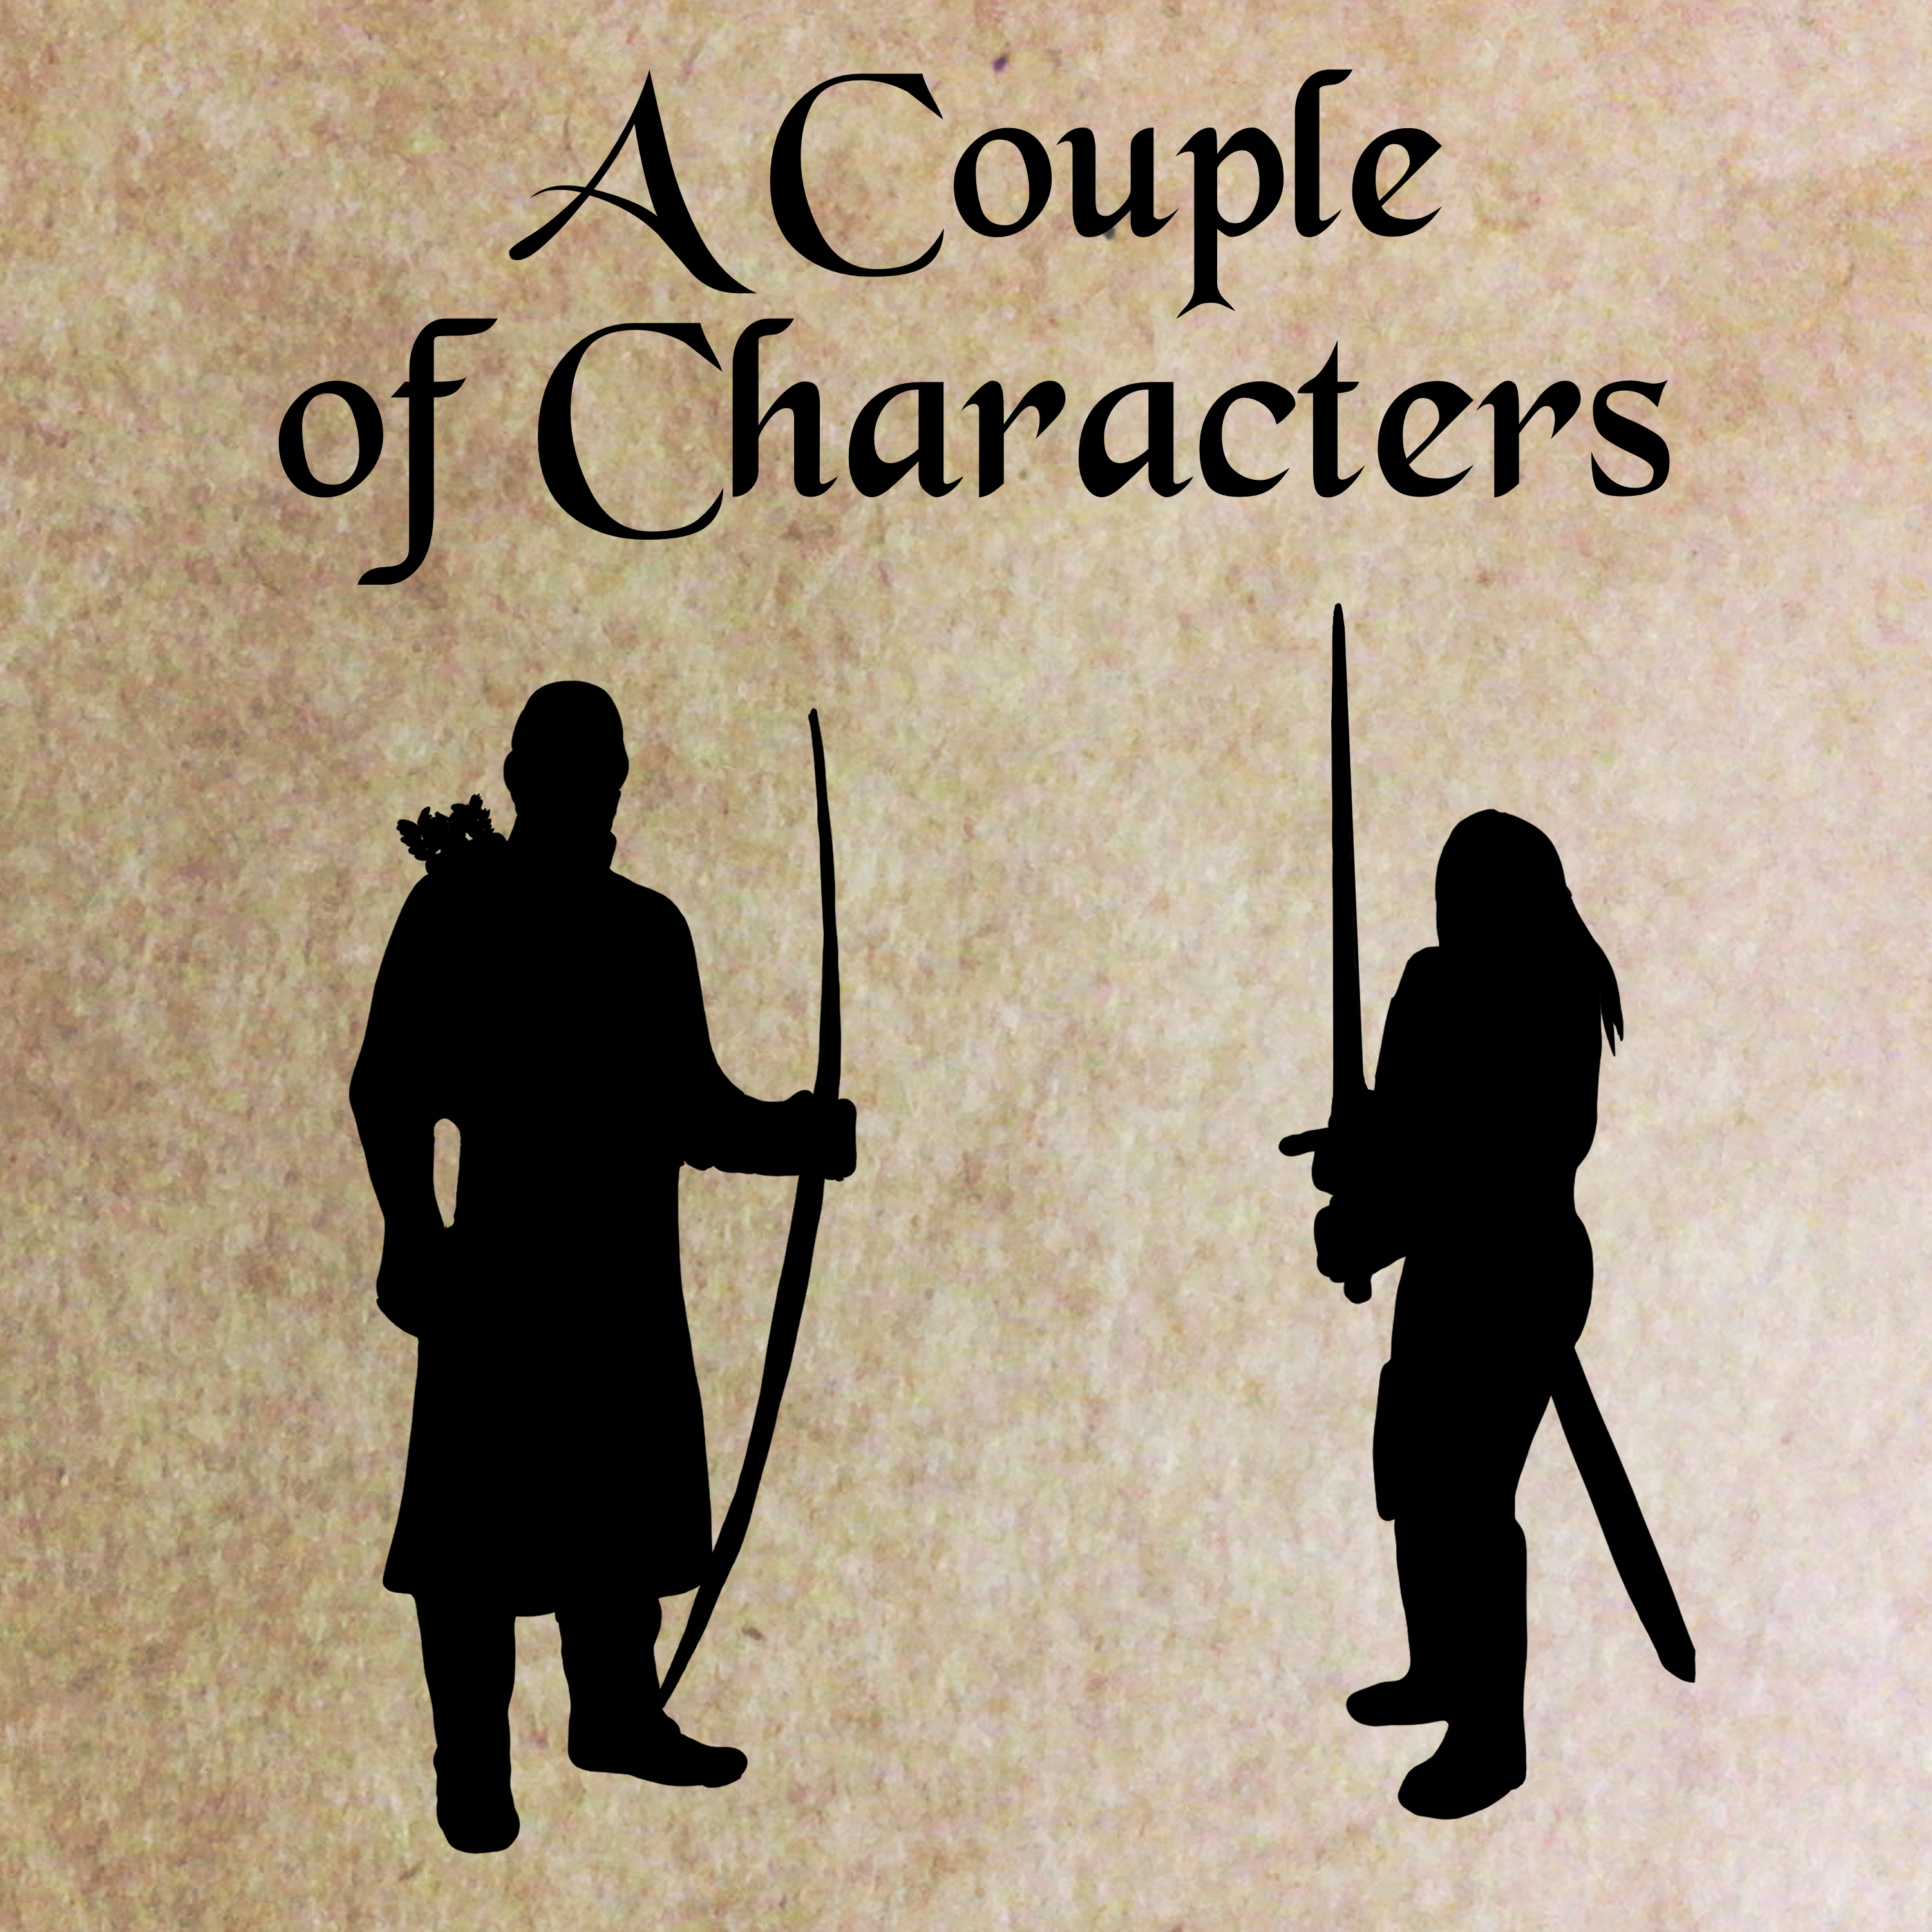 Podcast logo. Text reads: A Couple of Characters. Black text on a parchment background above two silhouettes. The left silhouette is a male archer and the right is a female sword wielder.